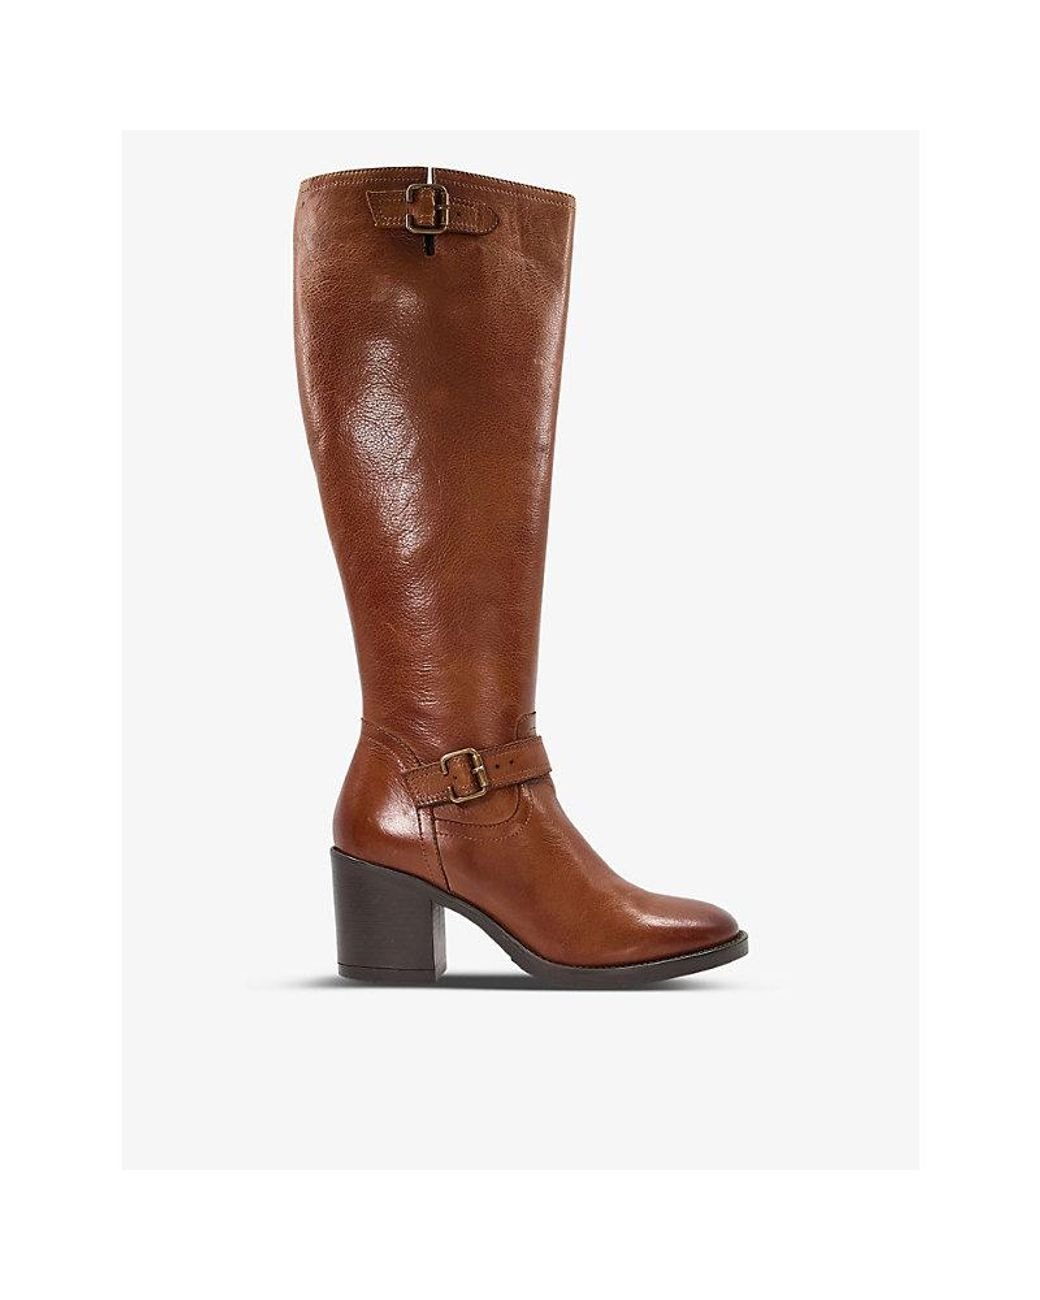 Dune Trelis Heeled Knee-high Leather Boots in Brown Lyst